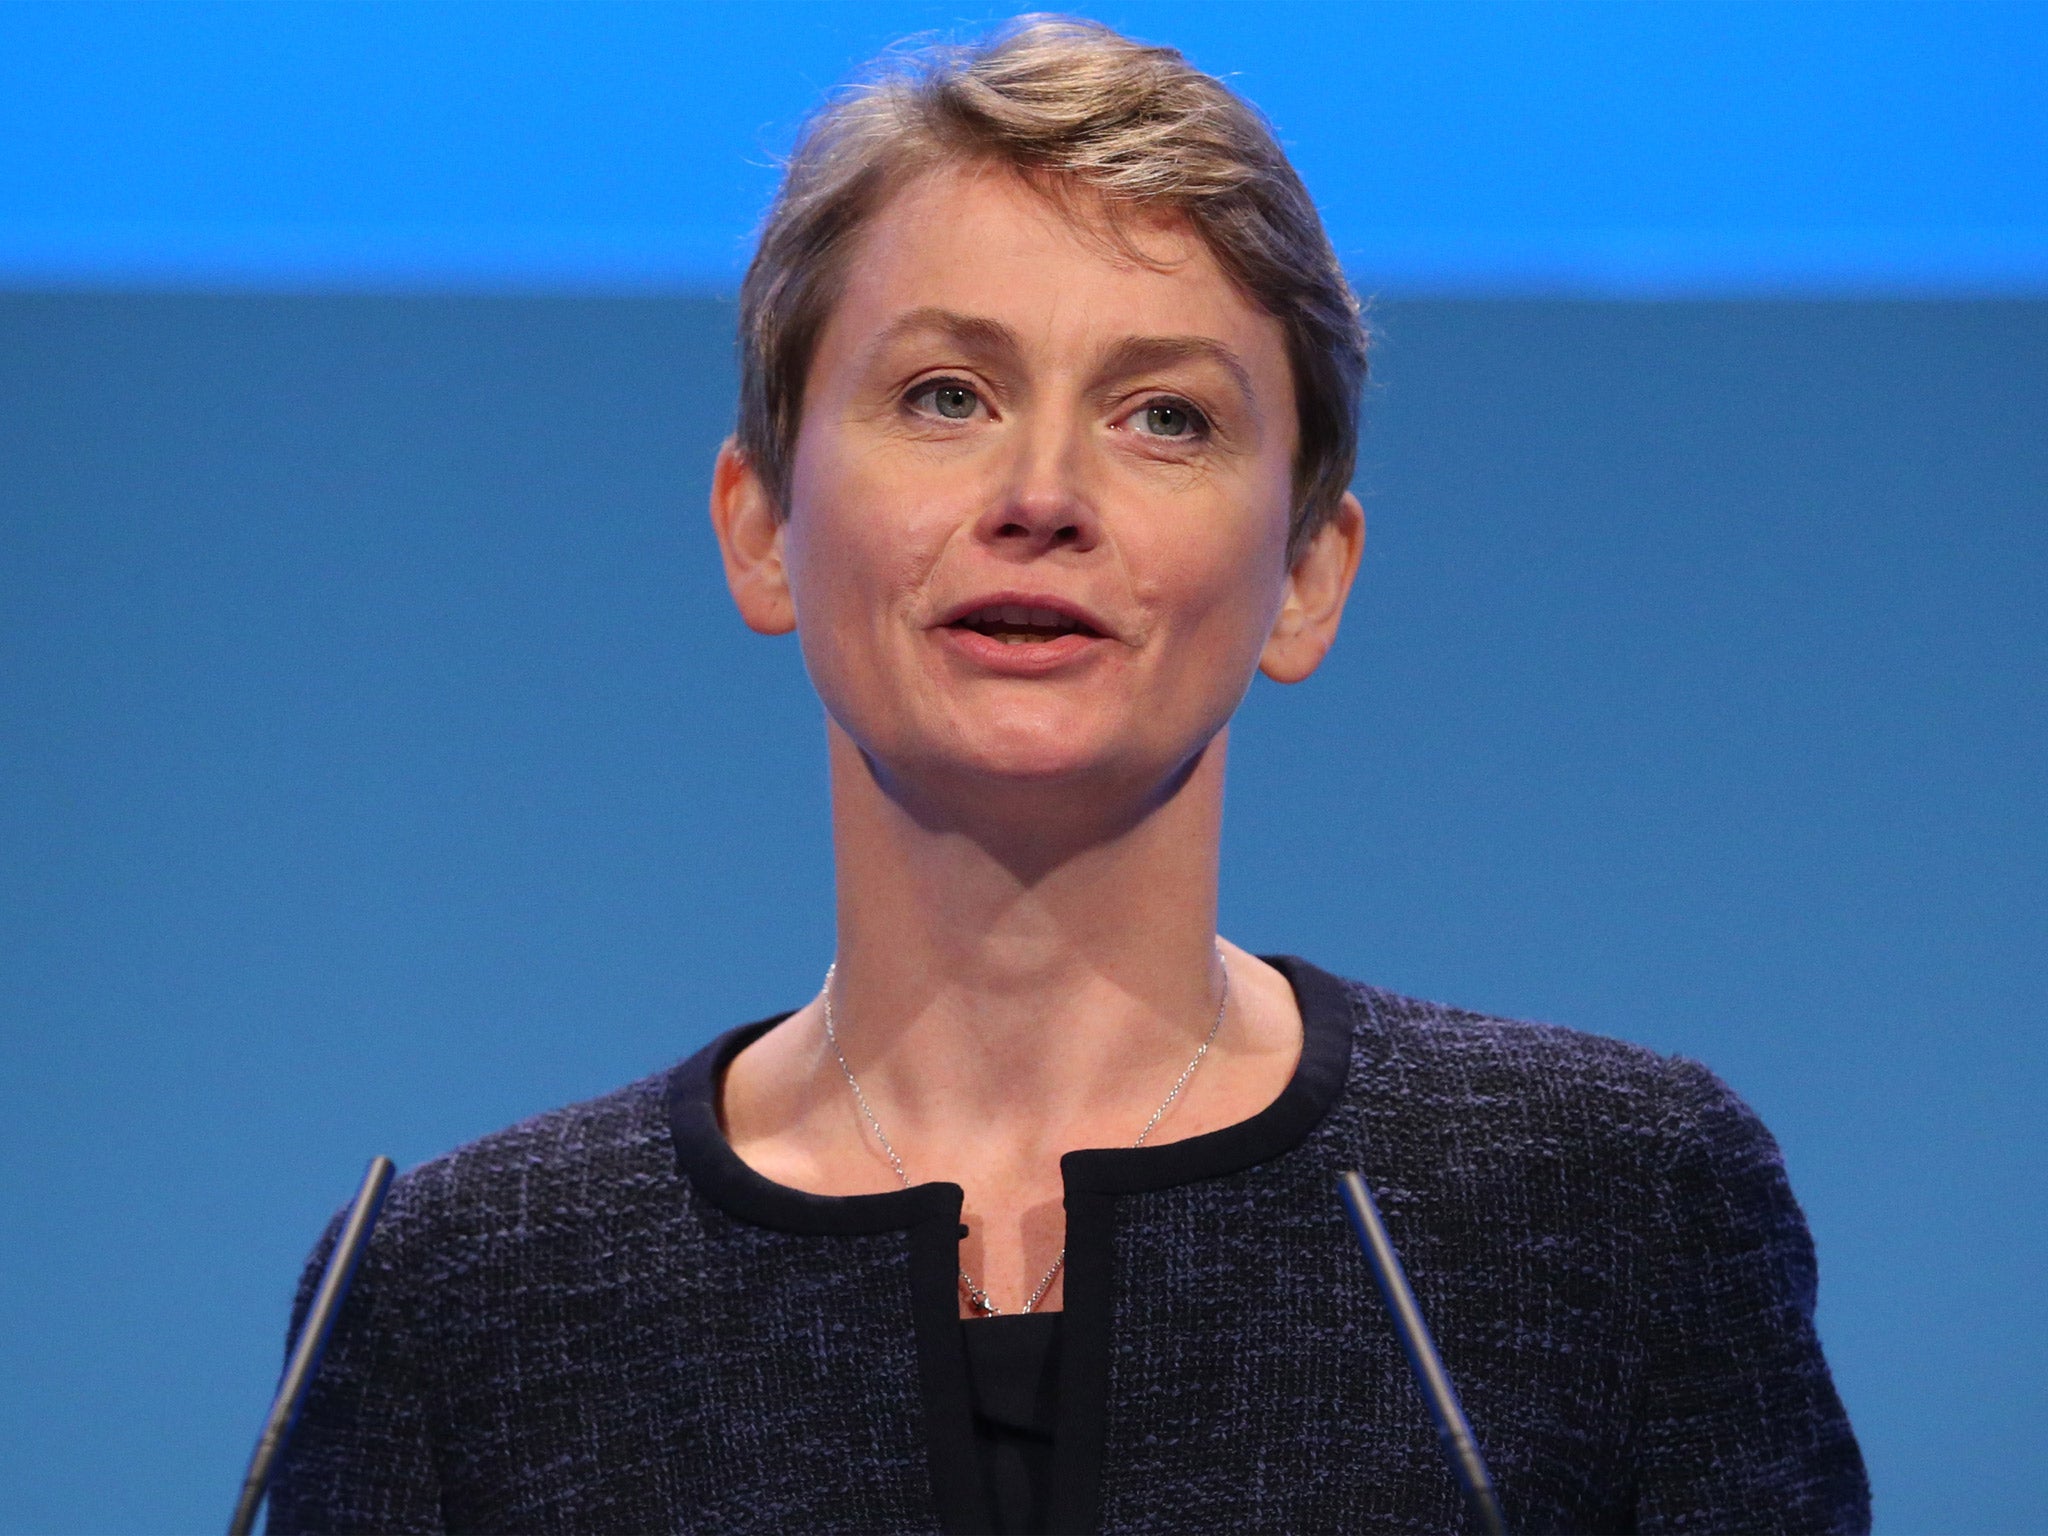 Yvette Cooper speaking at the Labour Party conference last year